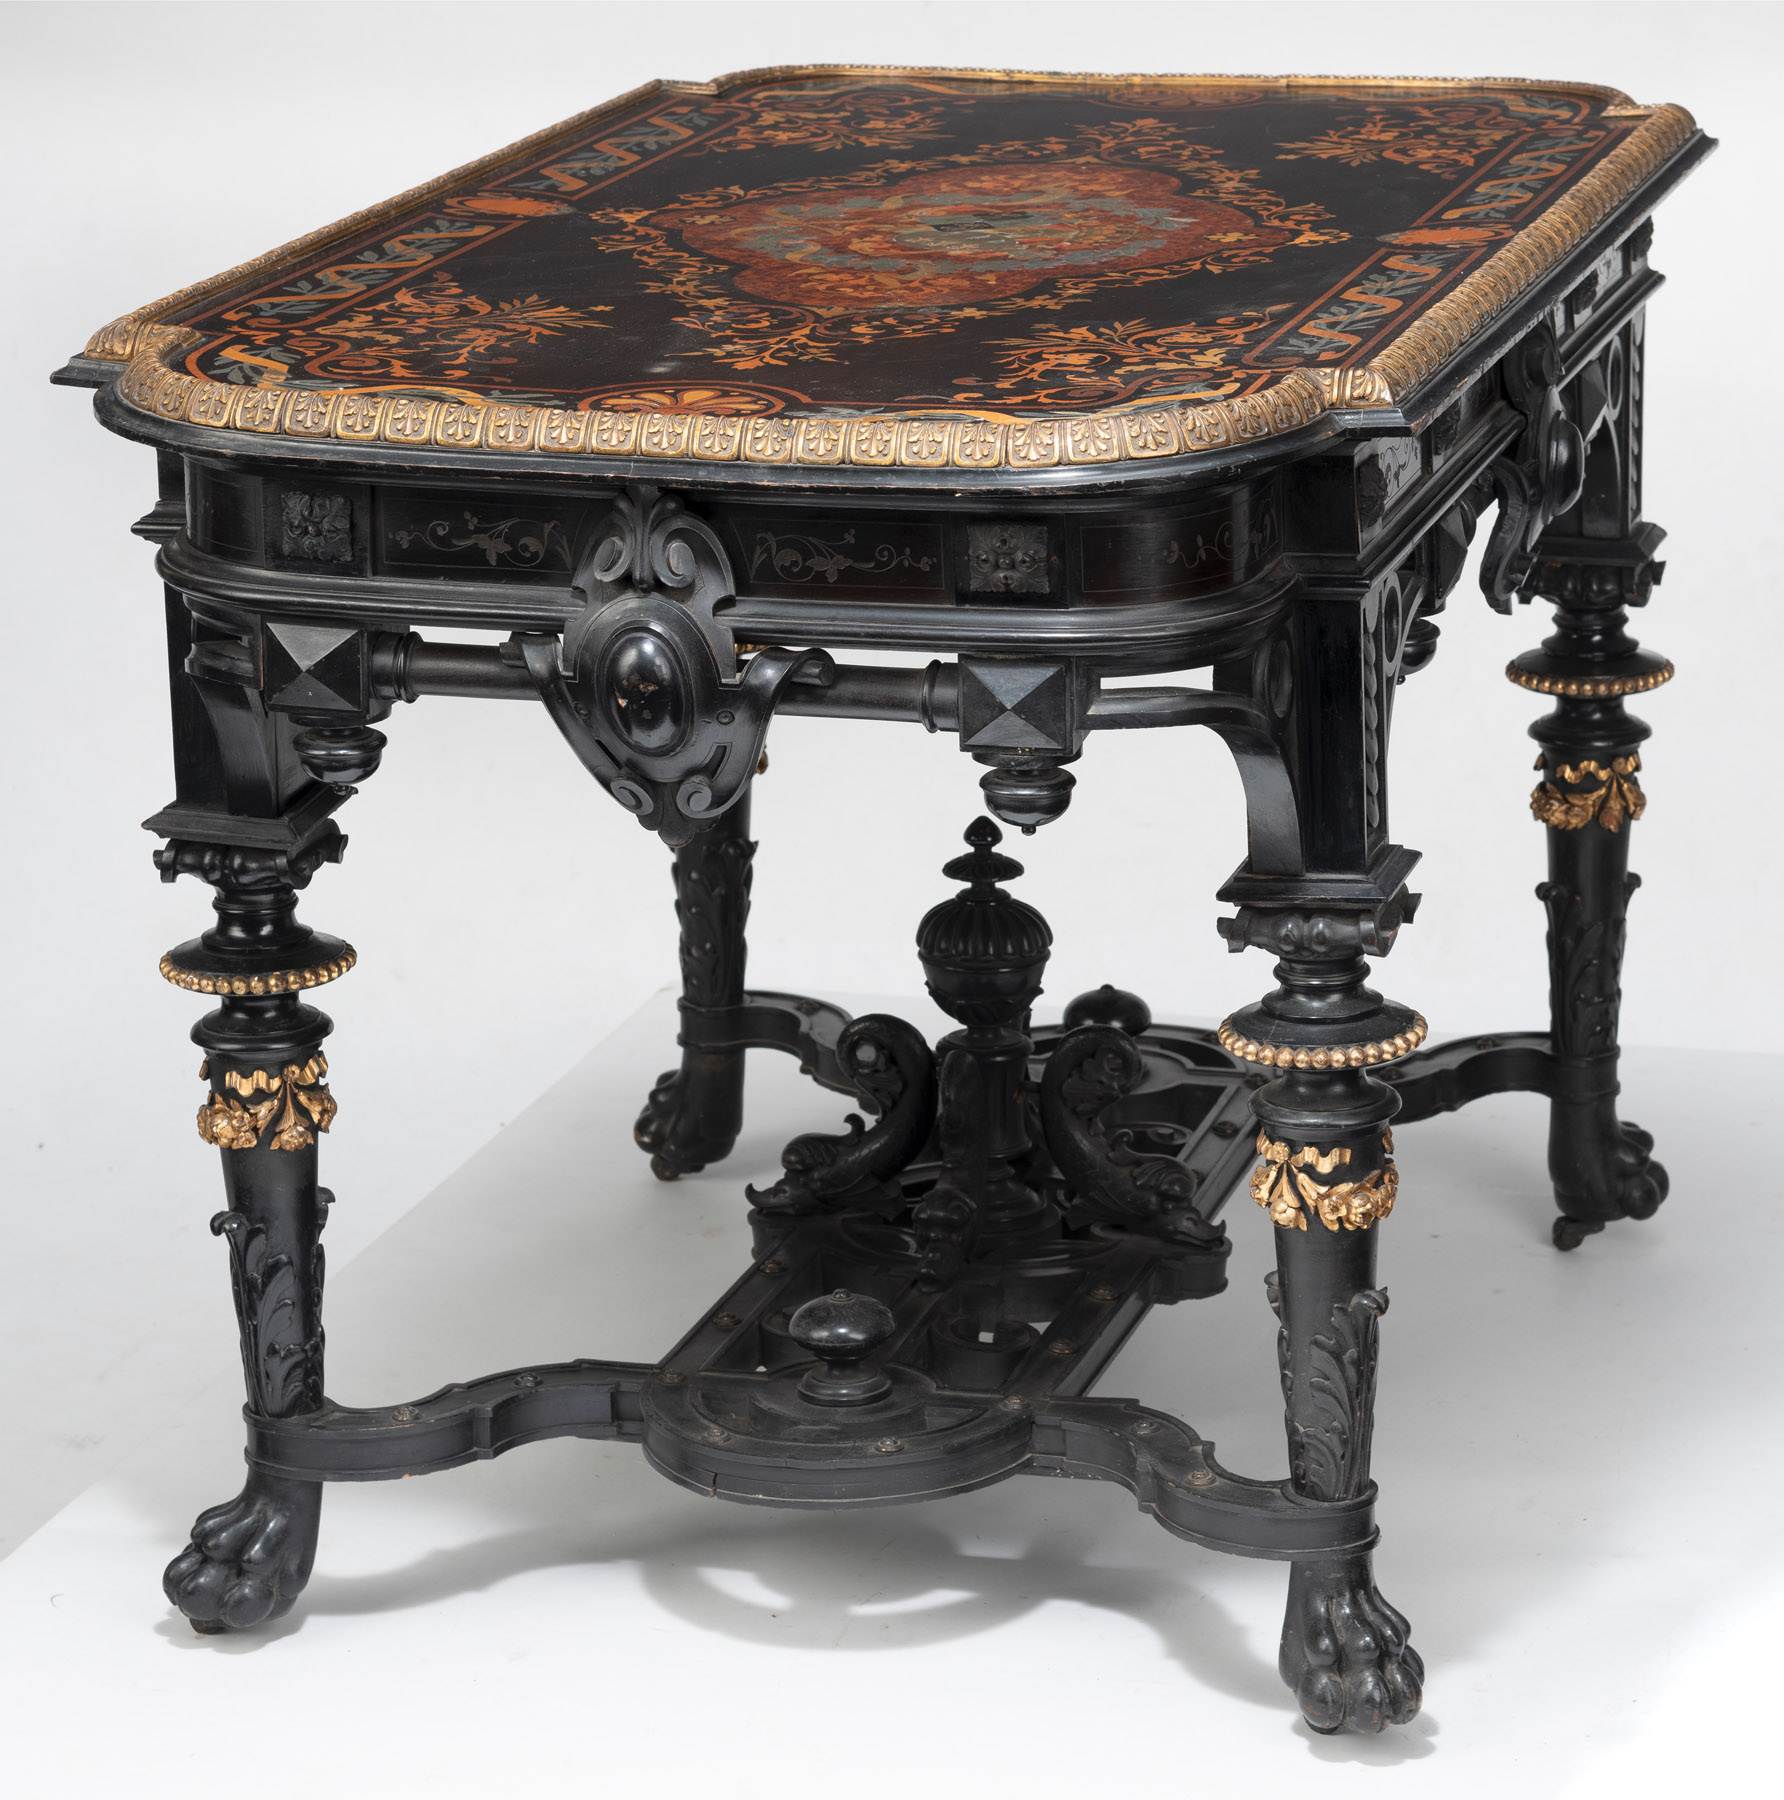 Magnificent centre table with the alliance coat of arms of Agnes von Württemberg and Prince Heinric - Image 7 of 11